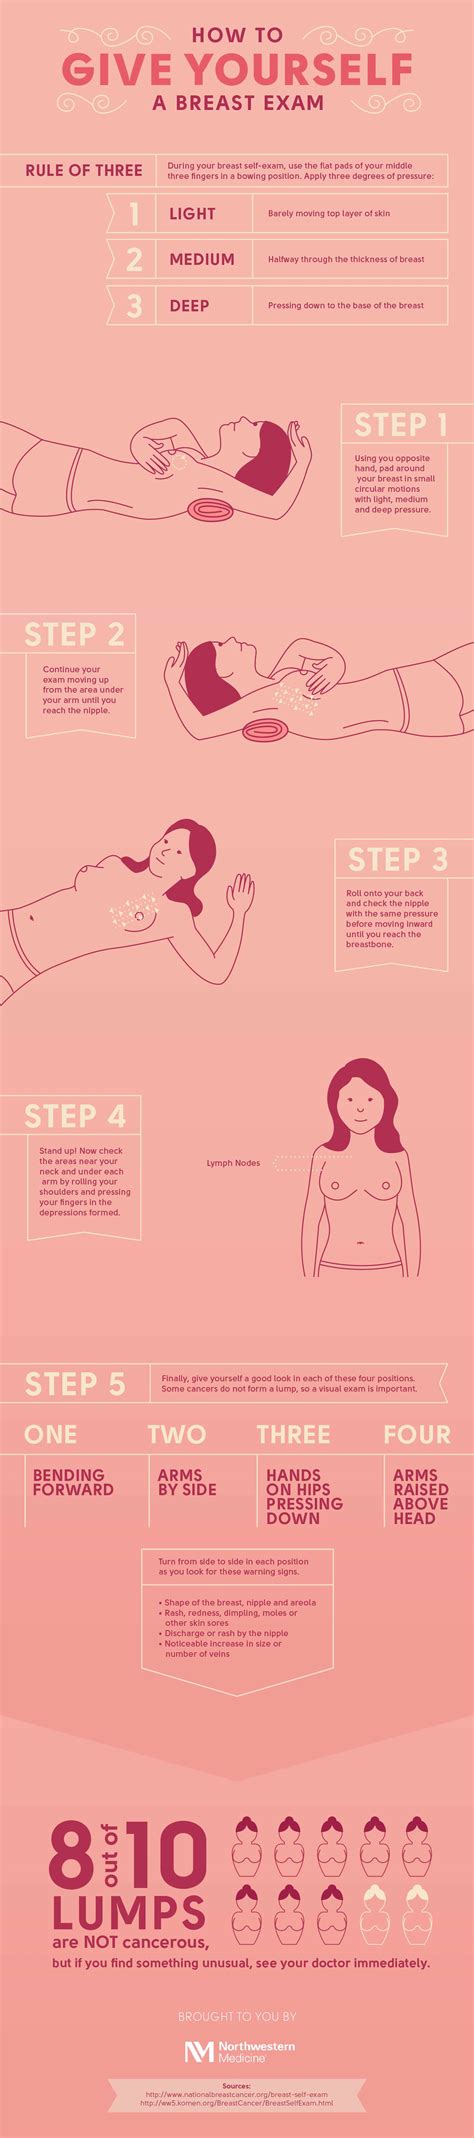 How To Do A Self Breast Exam Infographic Northwestern Medicine